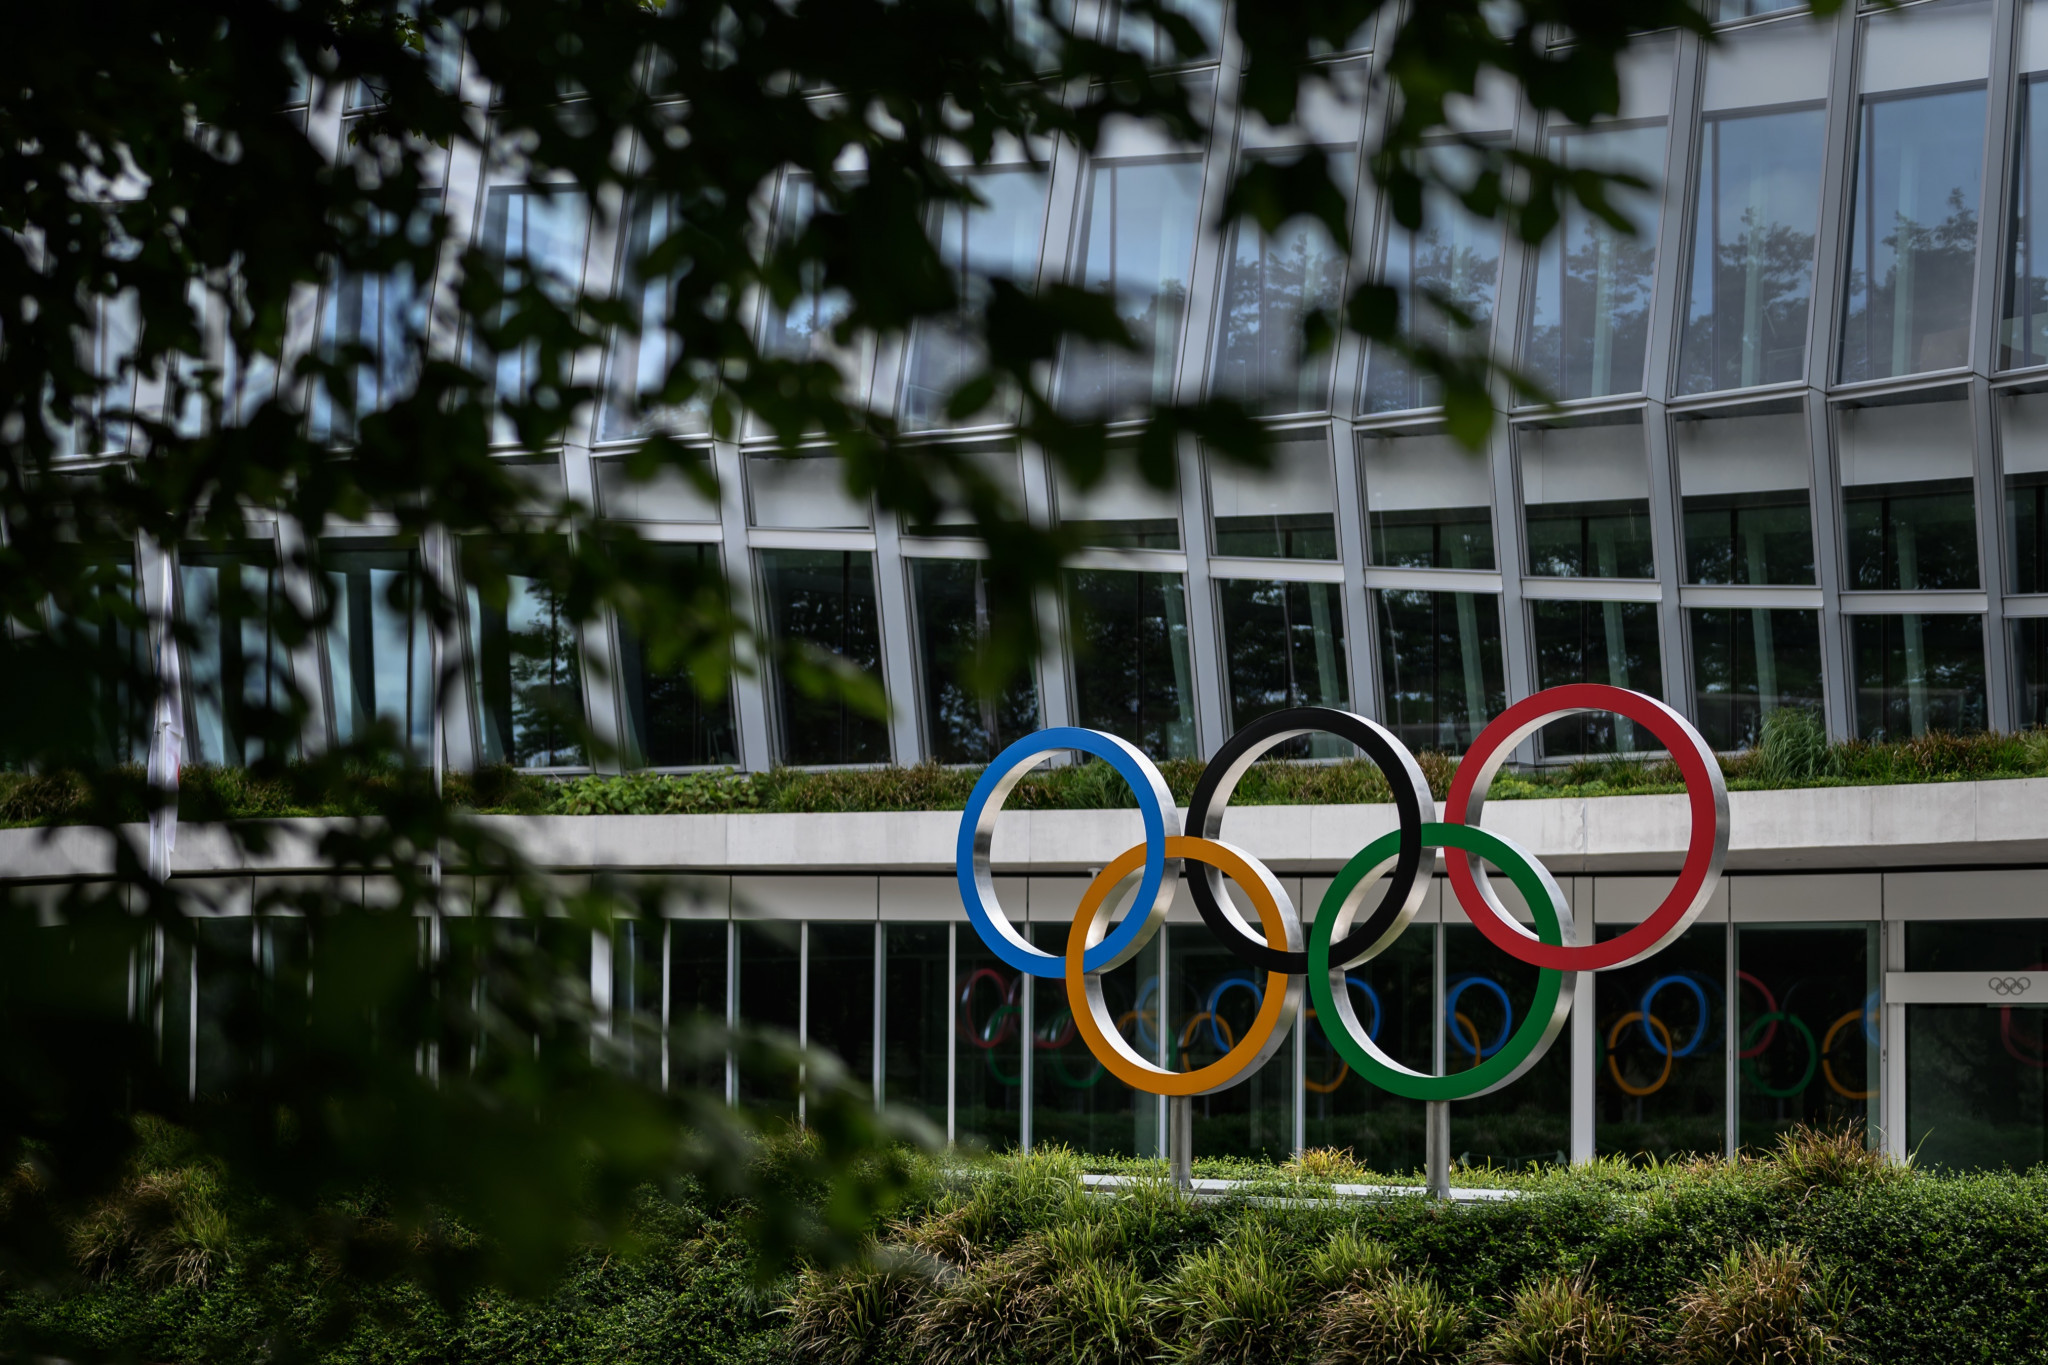 Members of the IOC Executive Board are set to hold meetings over the next two days in Lausanne ©Getty Images